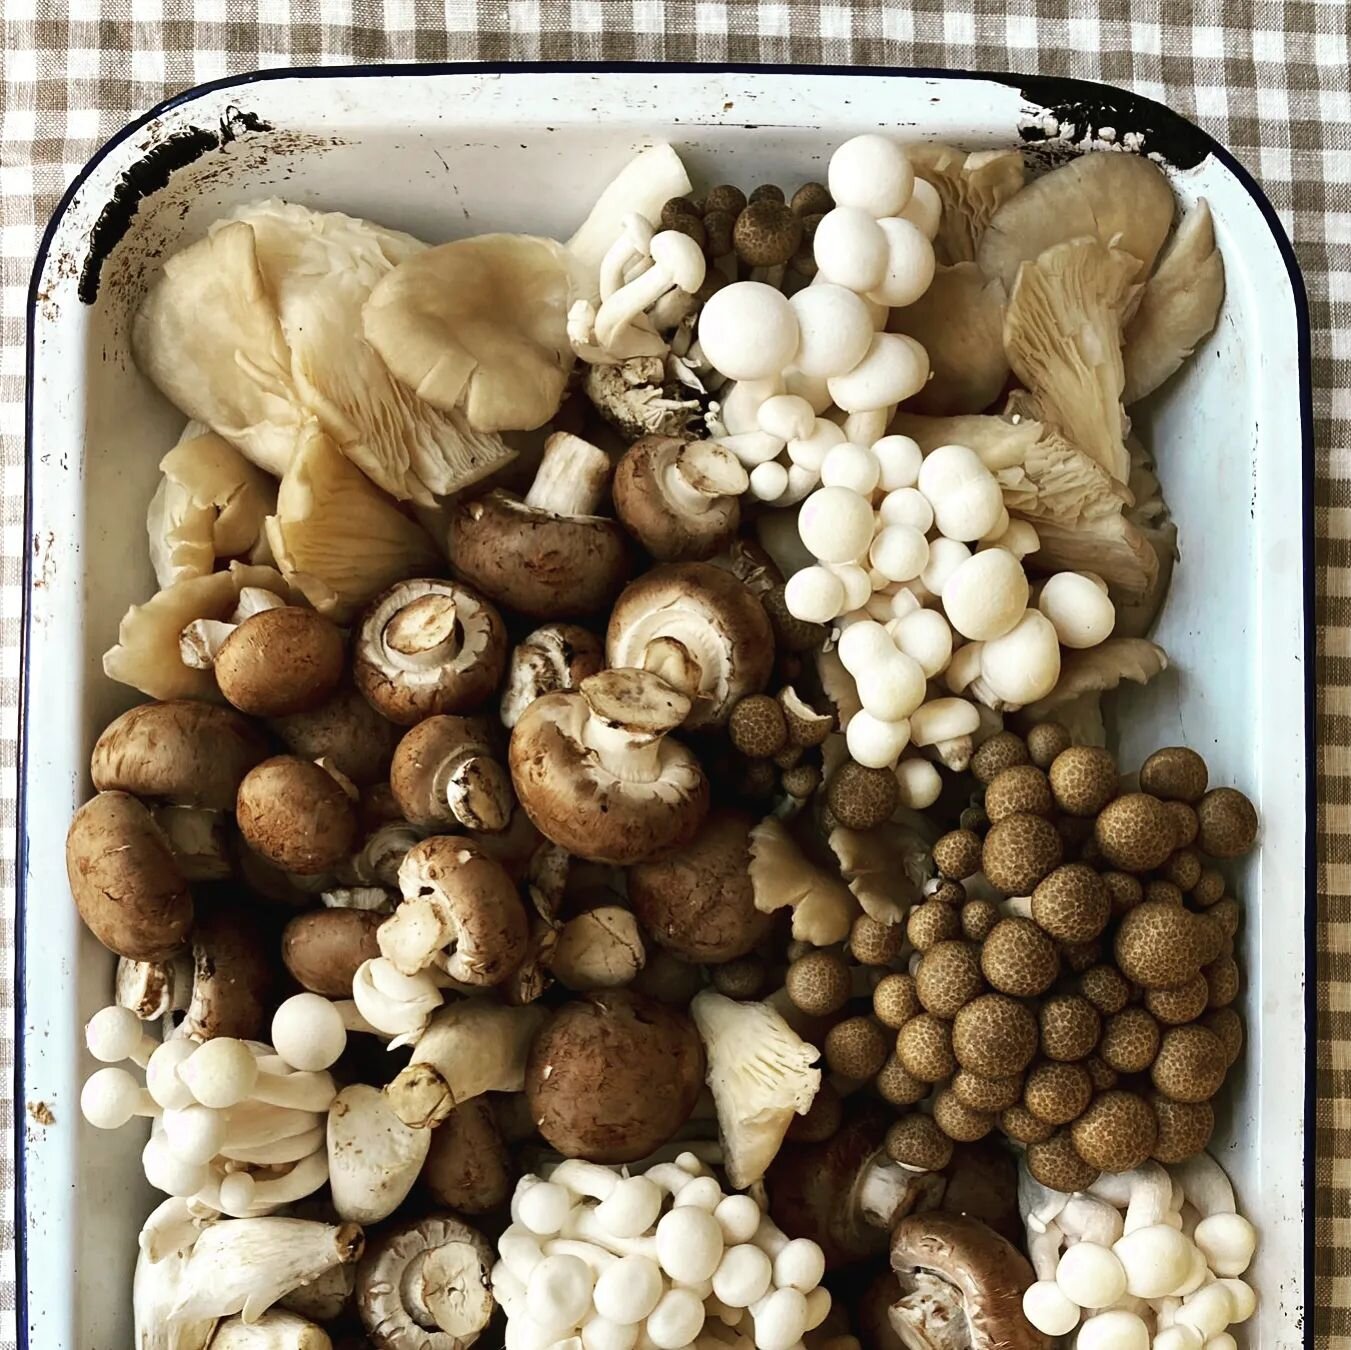 Who else is feeling 'autumny' today? 🍂 

Lovely fresh wild mushies soon to be given some love for our mushroom dish 🍄 

Or add an egg and some streaky bacon if you're after a bigger breakfast 😊

#mushrooms #wildmushrooms #breakfast #brunch #cafewy